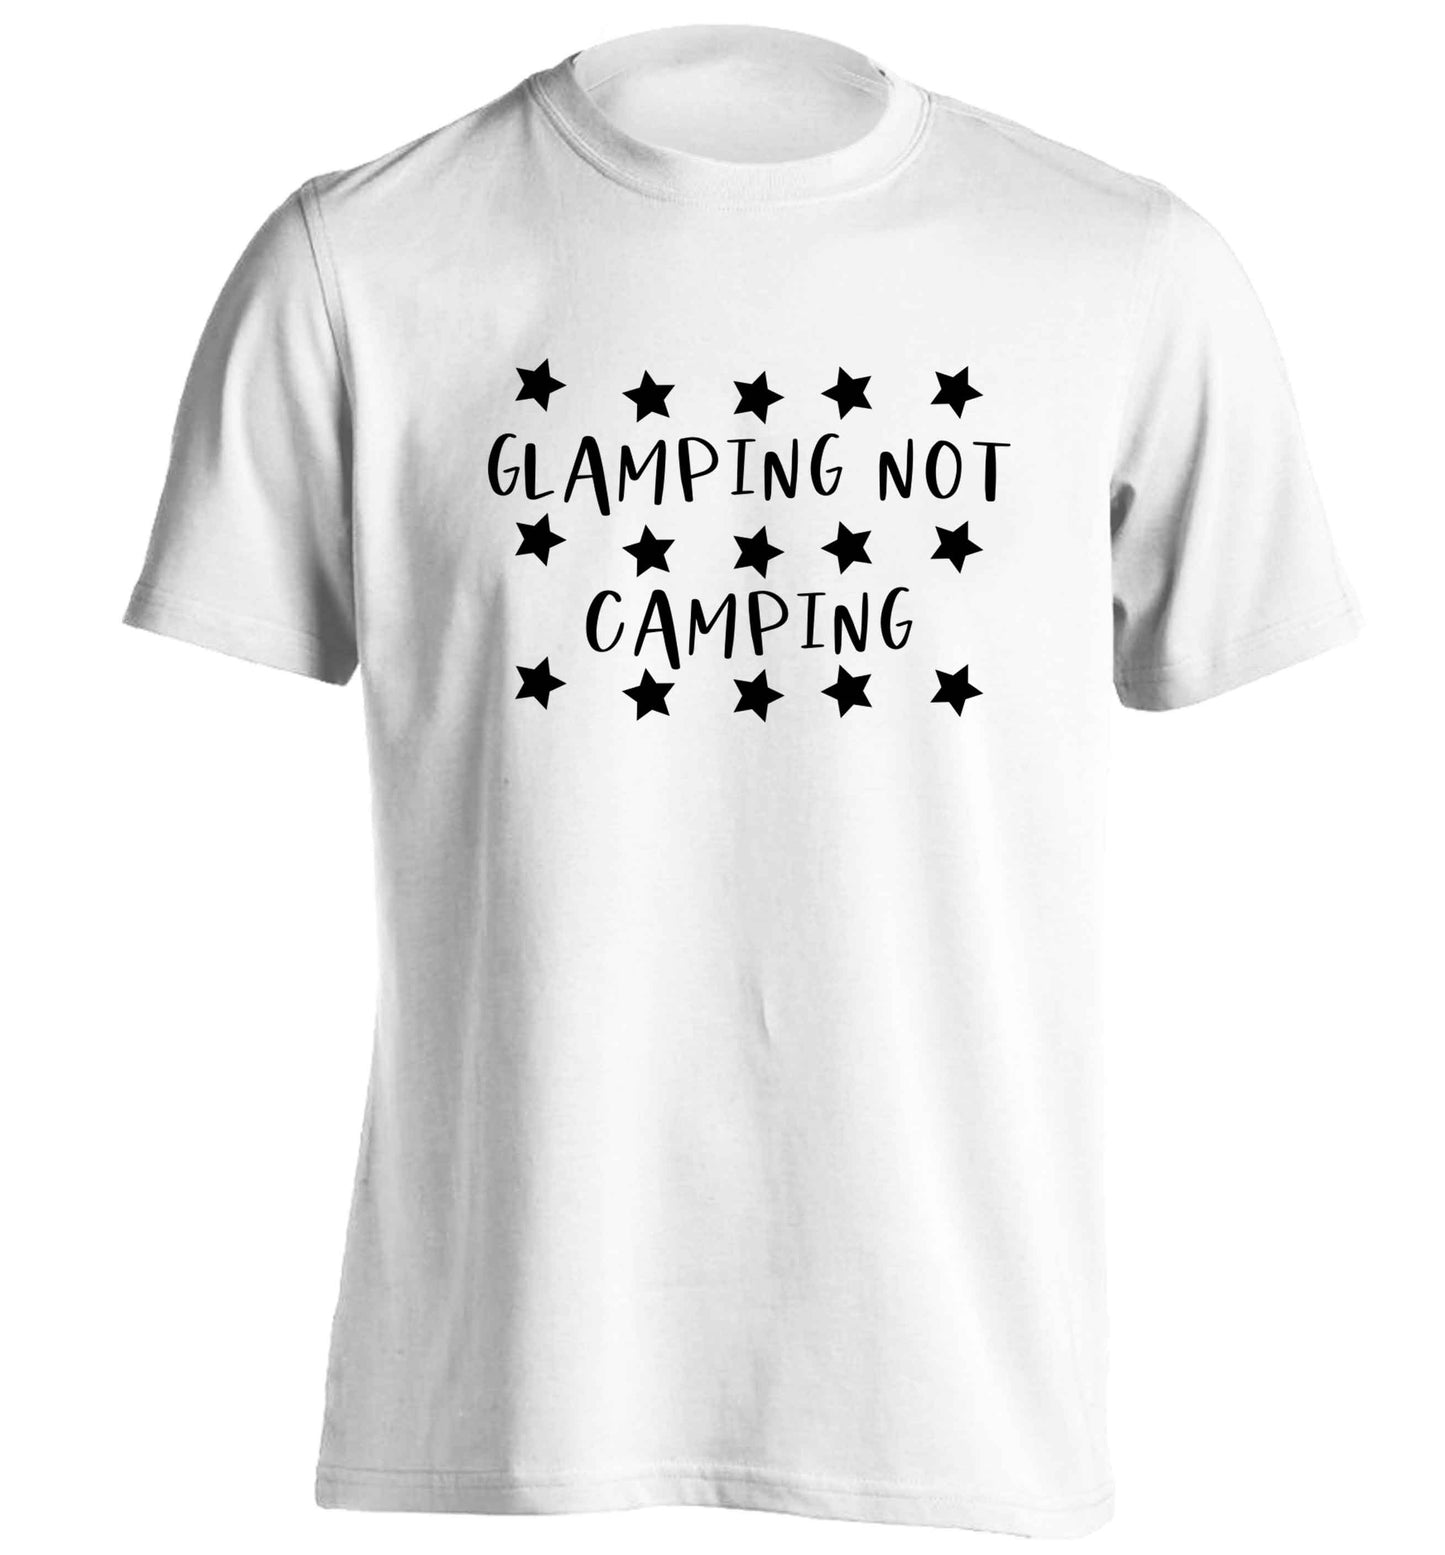 Glamping not camping adults unisex white Tshirt 2XL